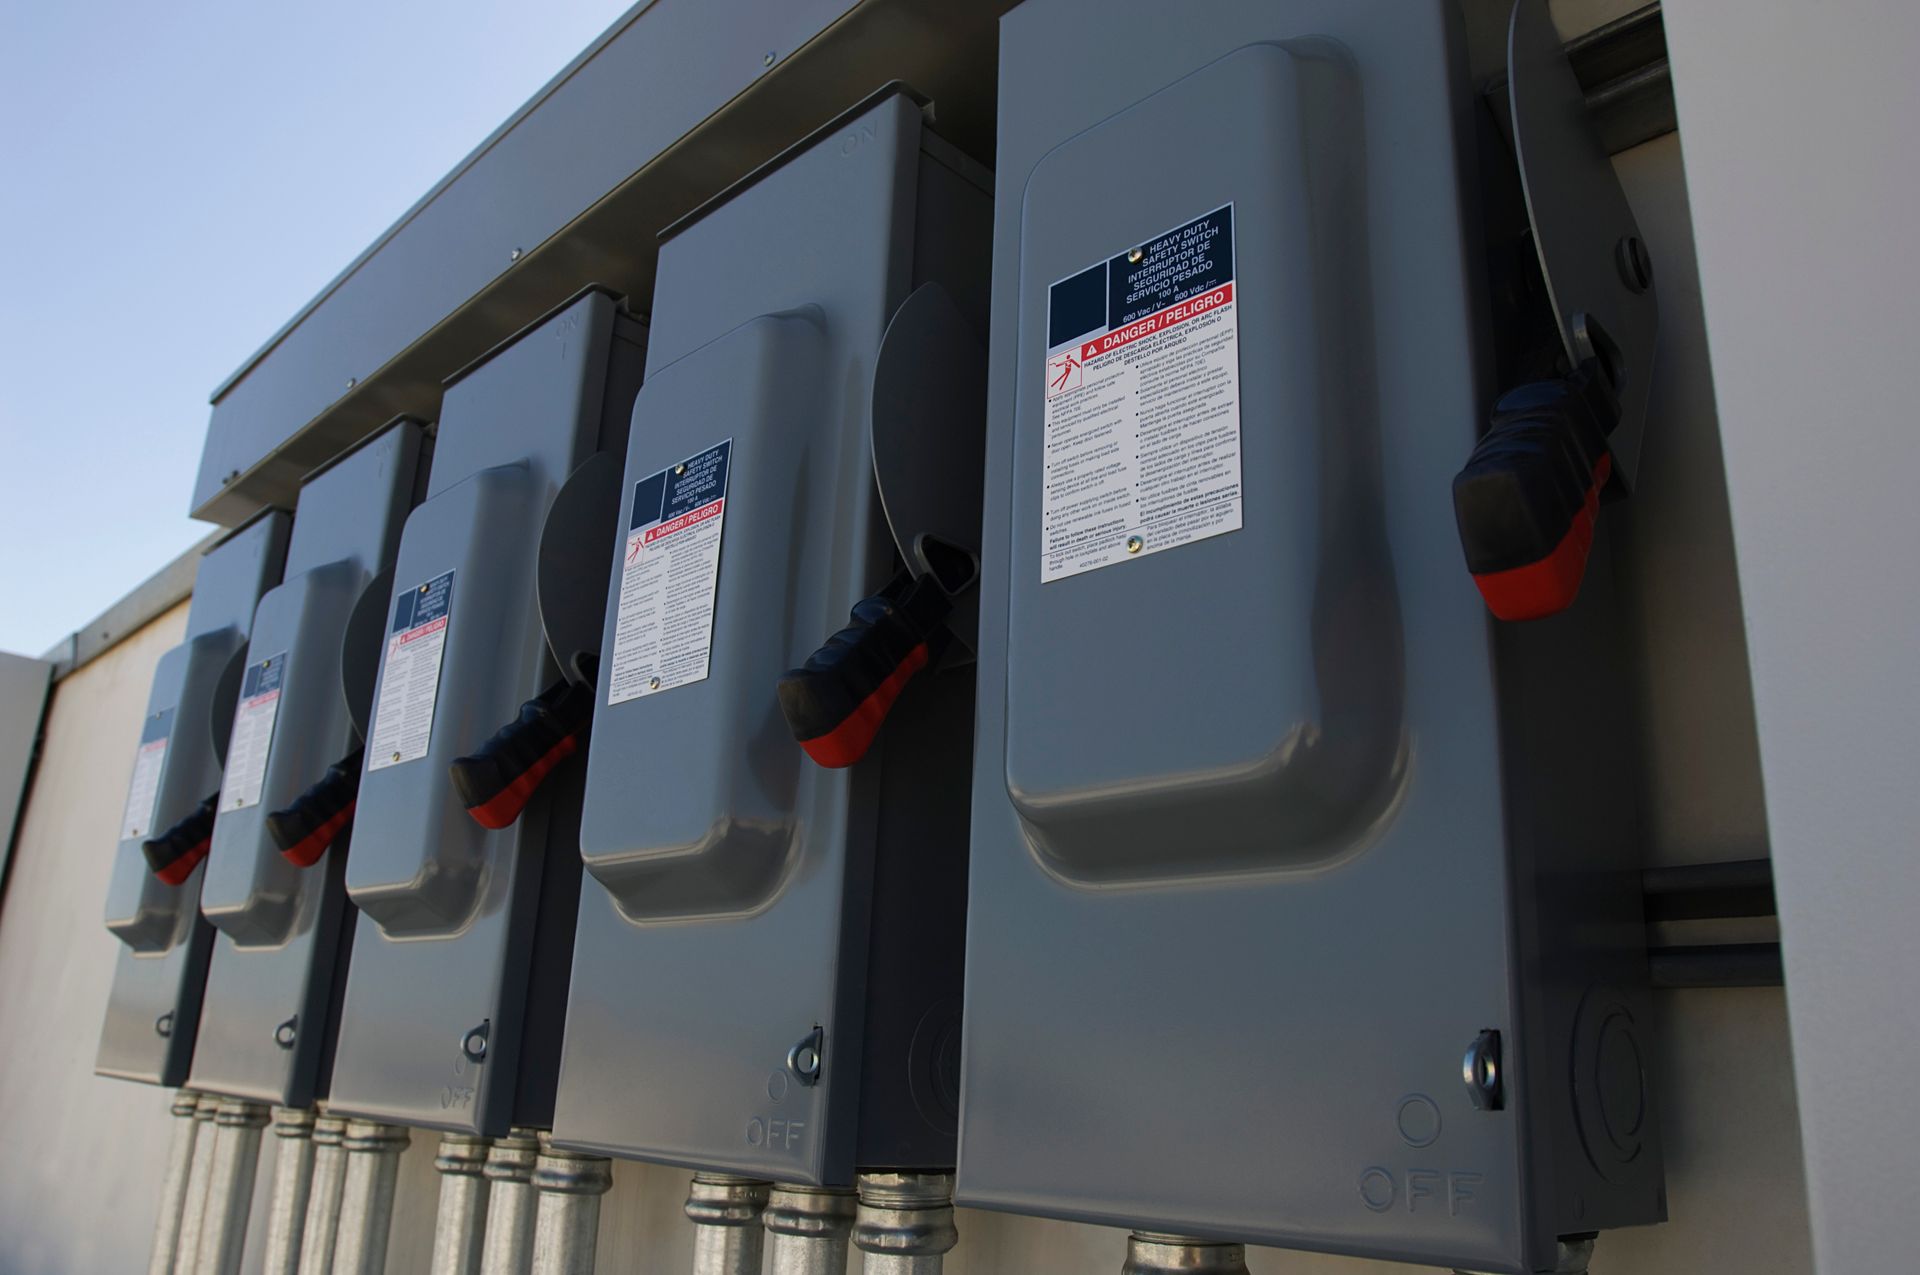 Close-up view of multiple electrical breaker boxes arranged neatly within a solar power plant facility.